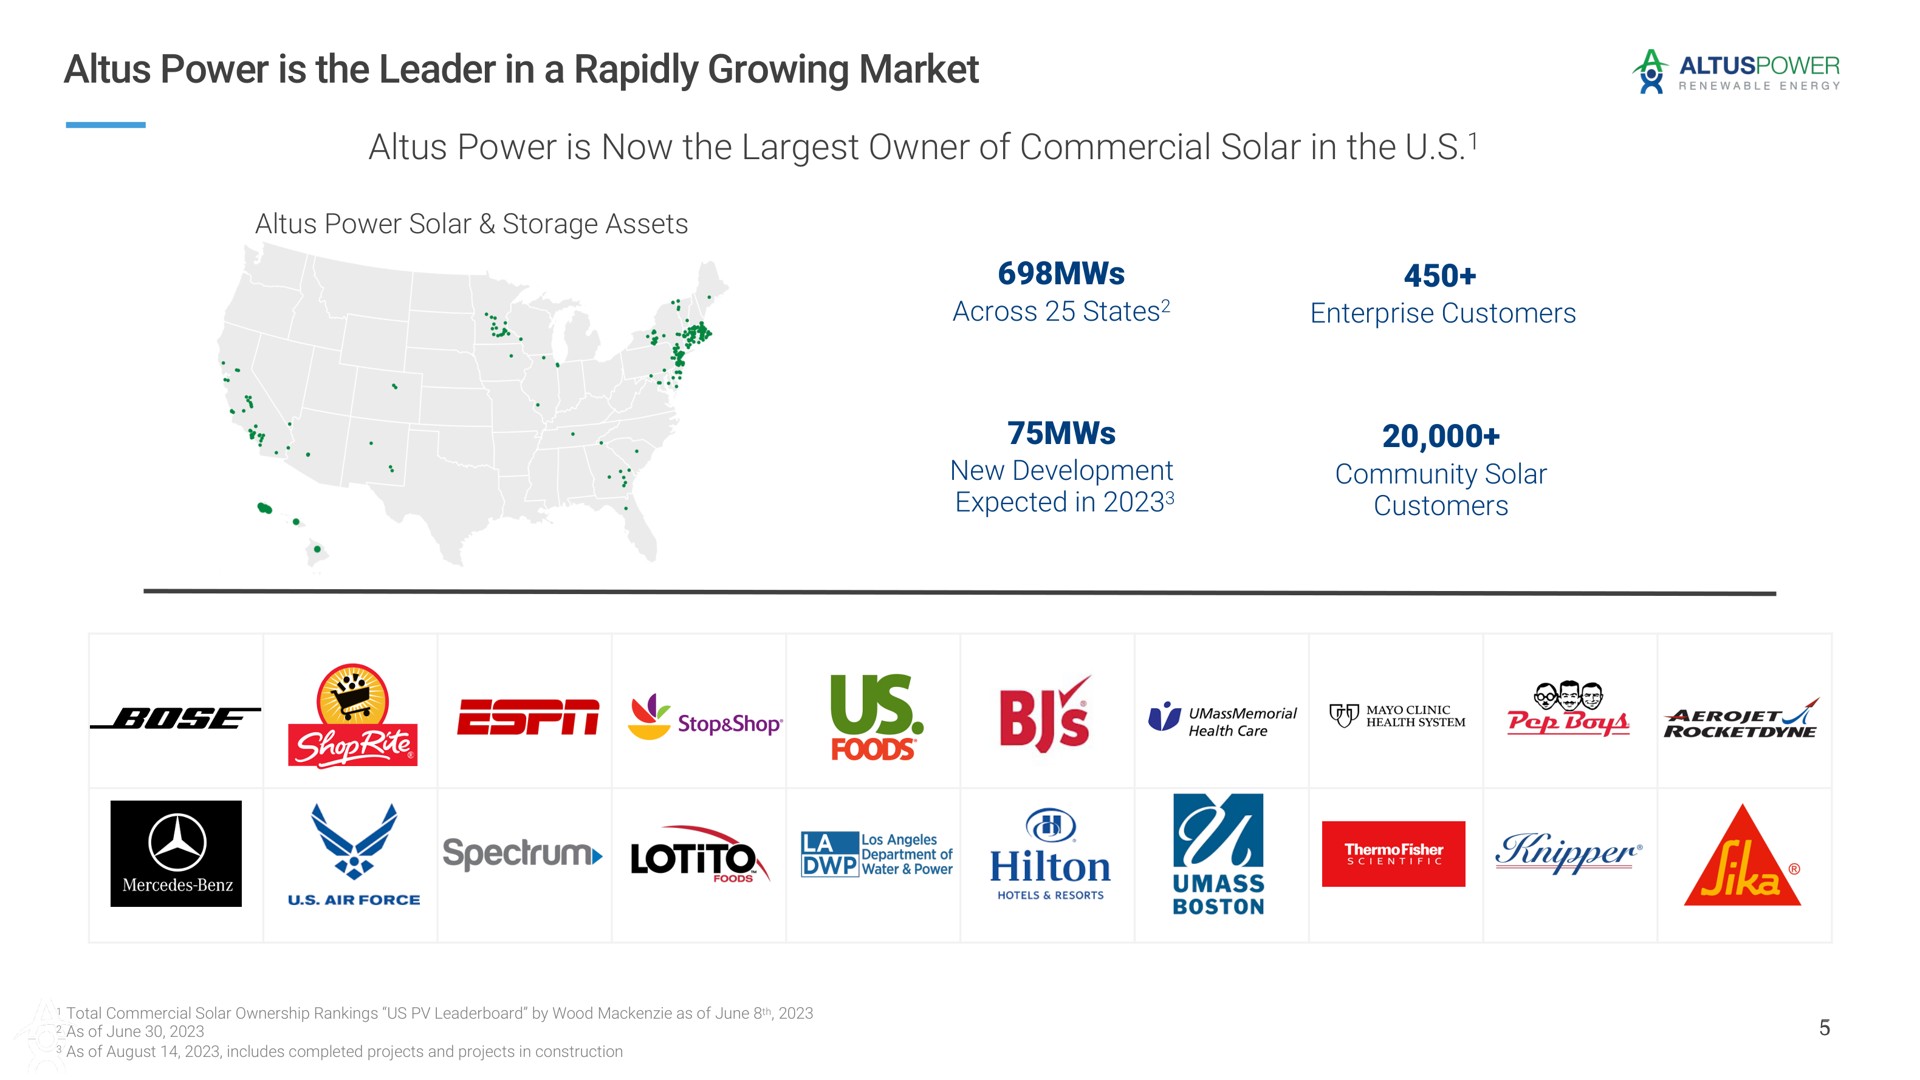 power is the leader in a rapidly growing market power is now the owner of commercial solar in the war across states enterprise customers us pis spectrum | Altus Power